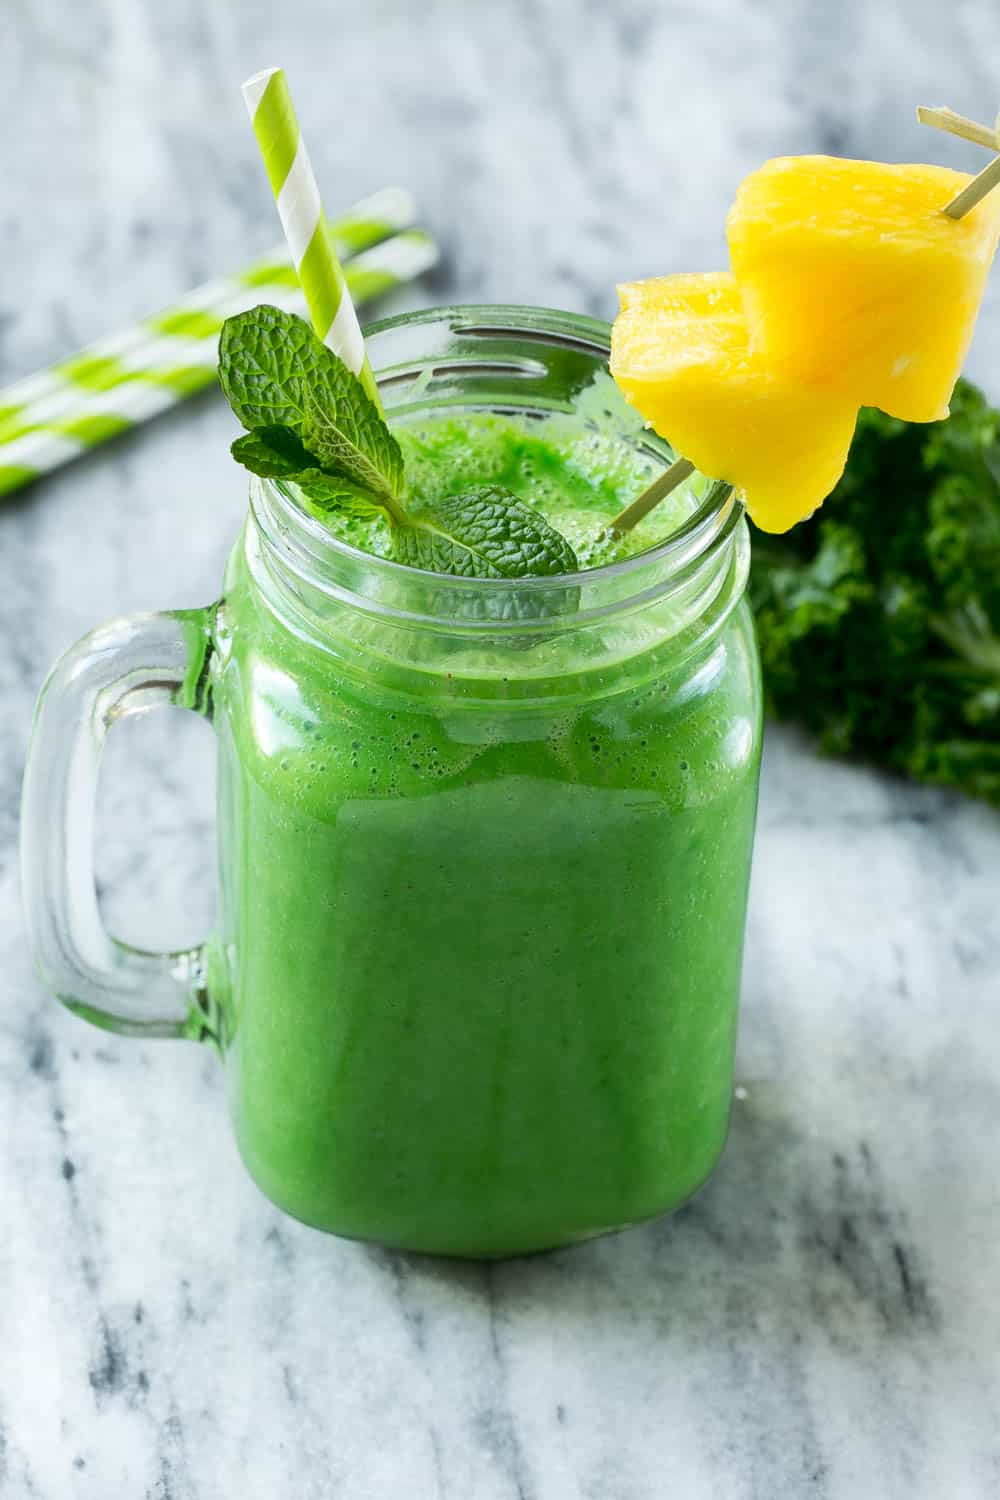 Pineapple Kale Smoothie - Healthy Green Smoothie Recipe